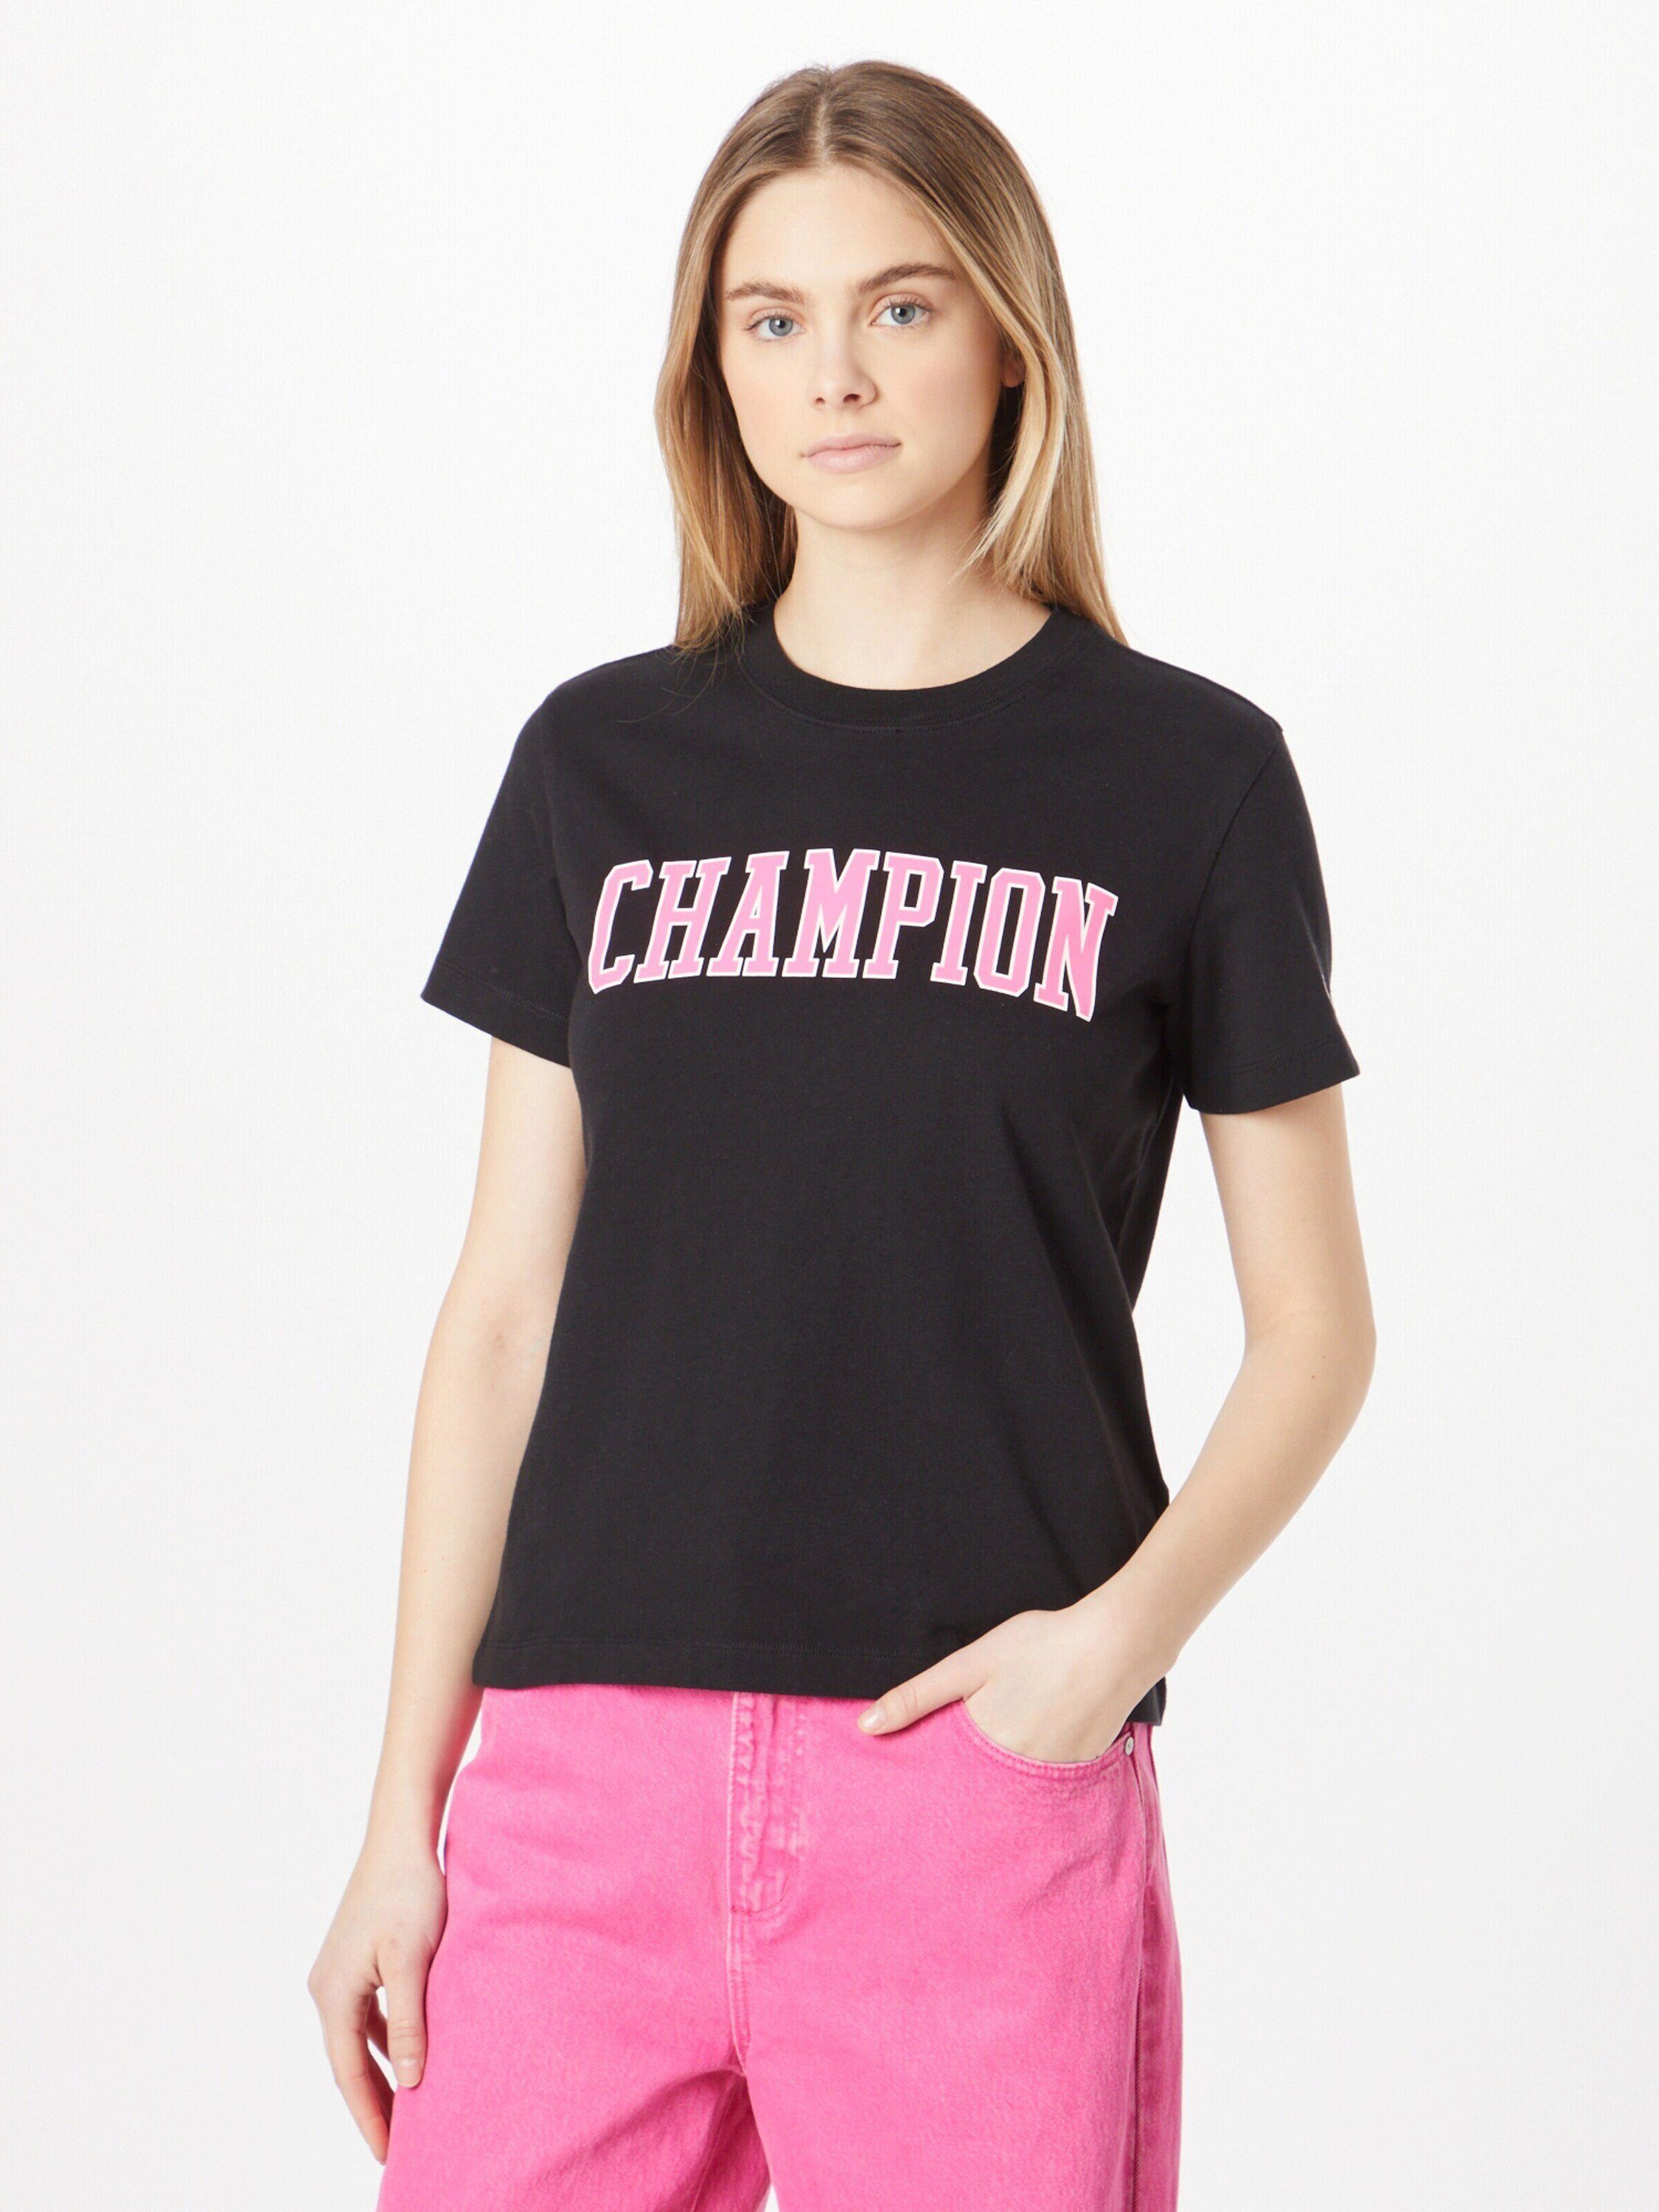 Champion Authentic NBK (1-tlg) Apparel Weiteres T-Shirt Detail Athletic